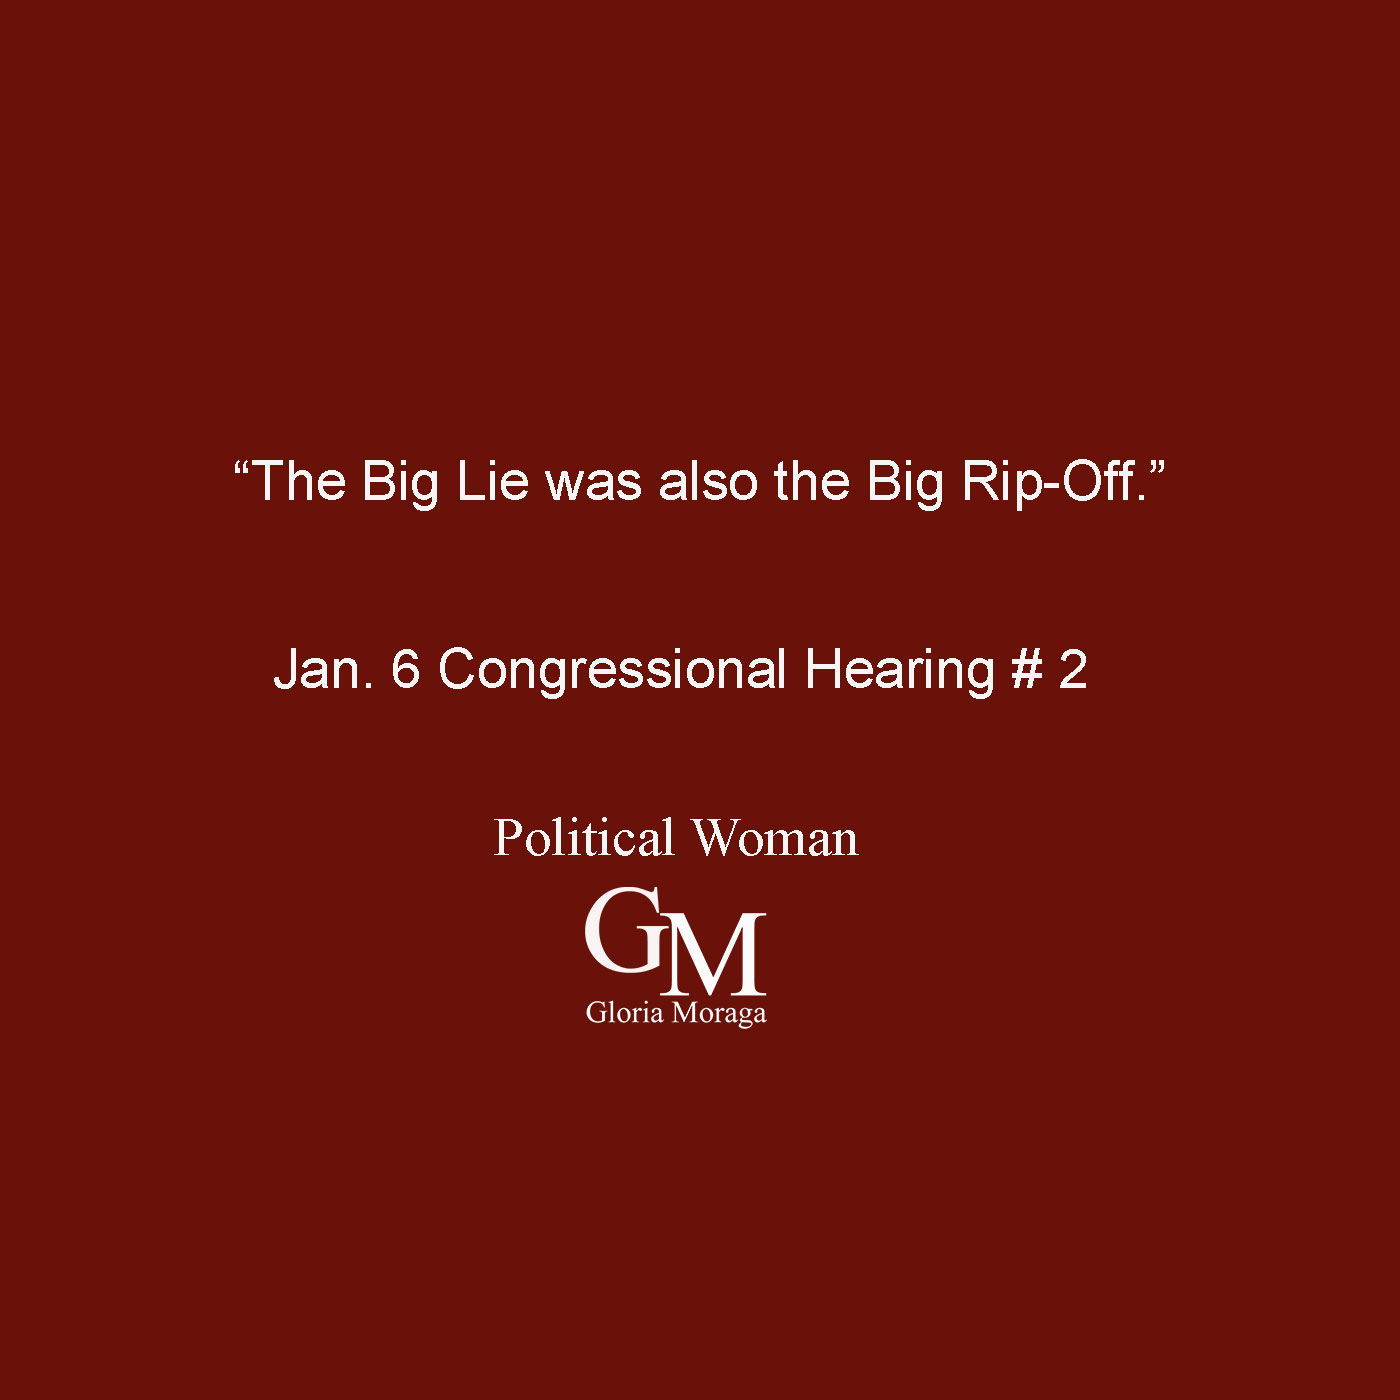 #2 "The Big Lie - The Big Rip-Off" - Hearing #2